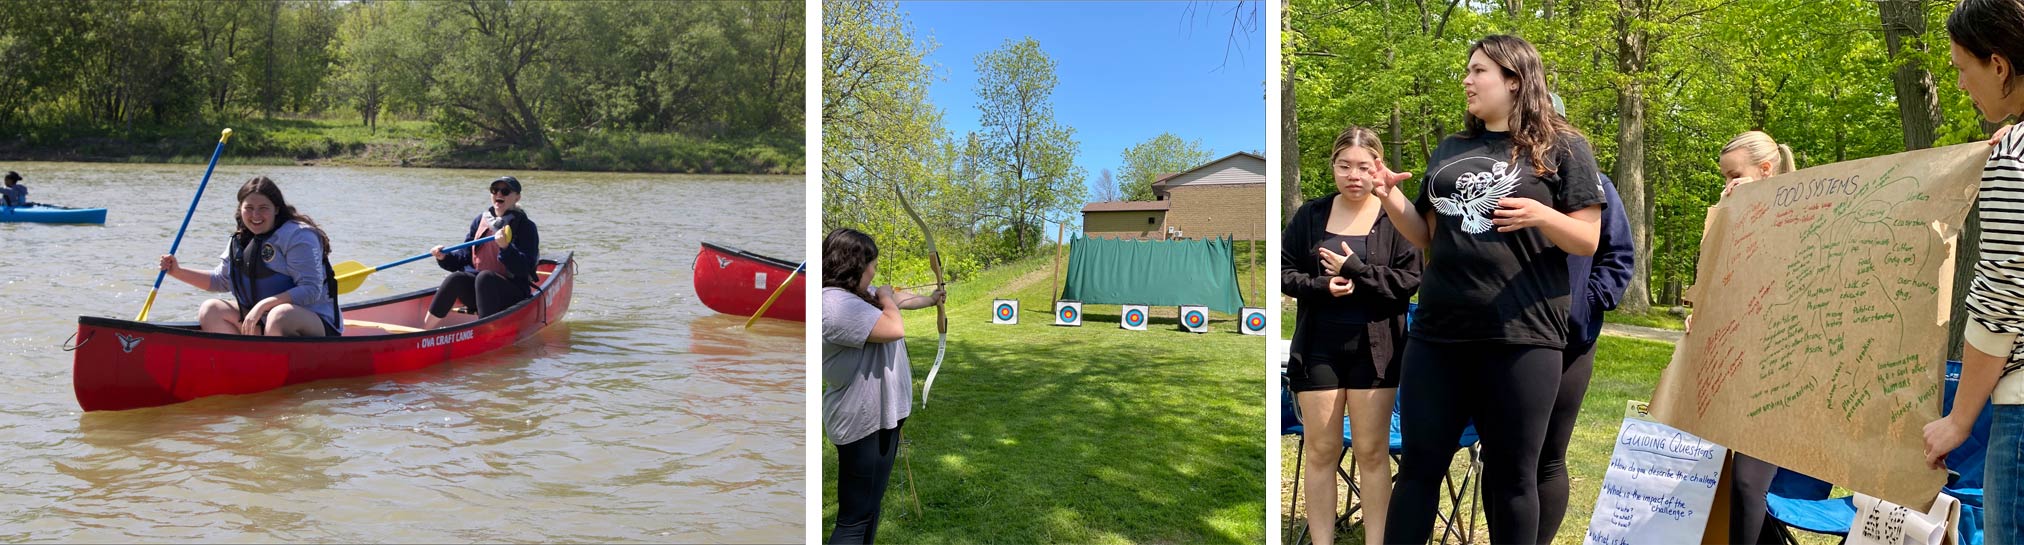 Collage of three images. Two individuals in a red canoe. Someone holding a bow and arrow looking down range at targets. Kaitlynn McLeod speaking with two individuals holding a large brown sheet of paper with writing on it. 